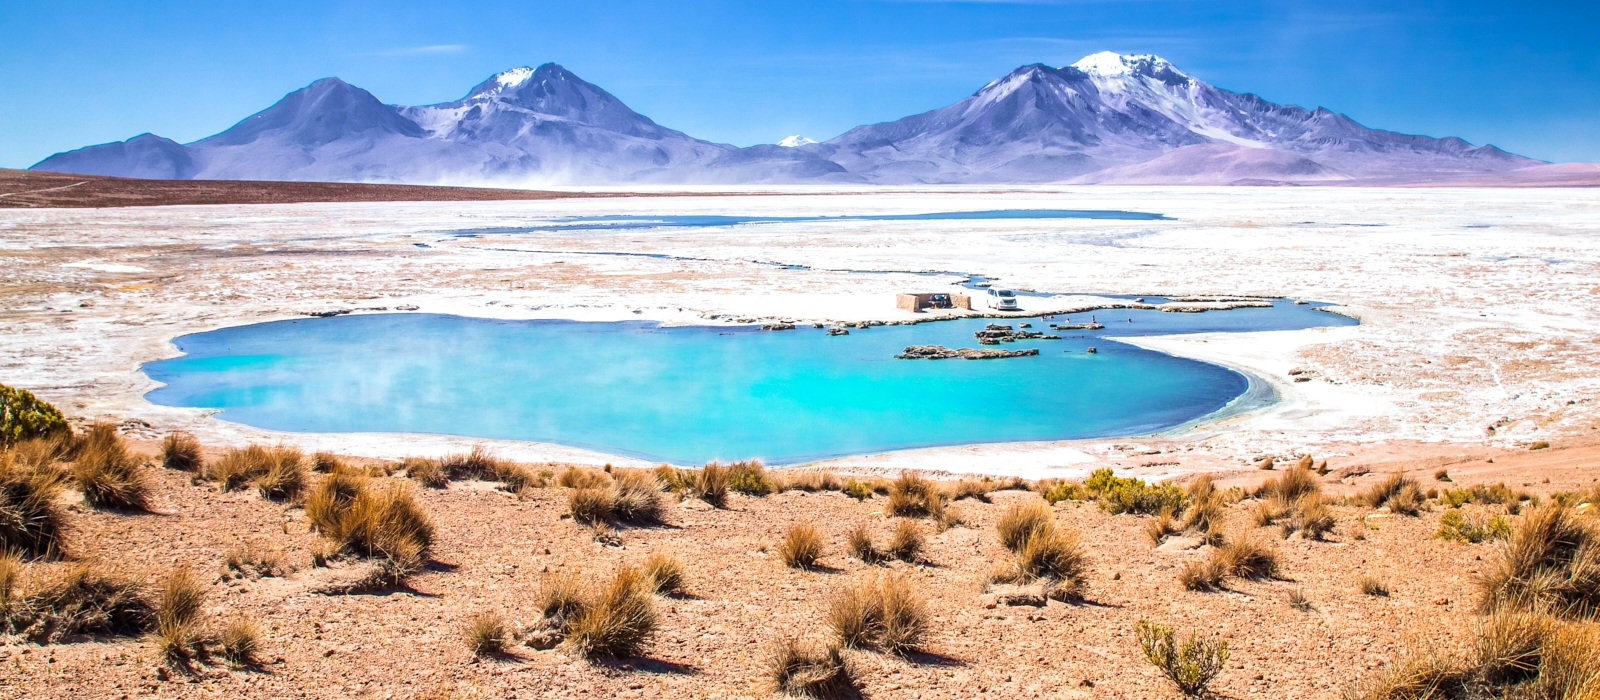 6 DAY CHILEAN ALTIPLANO AND ANDES